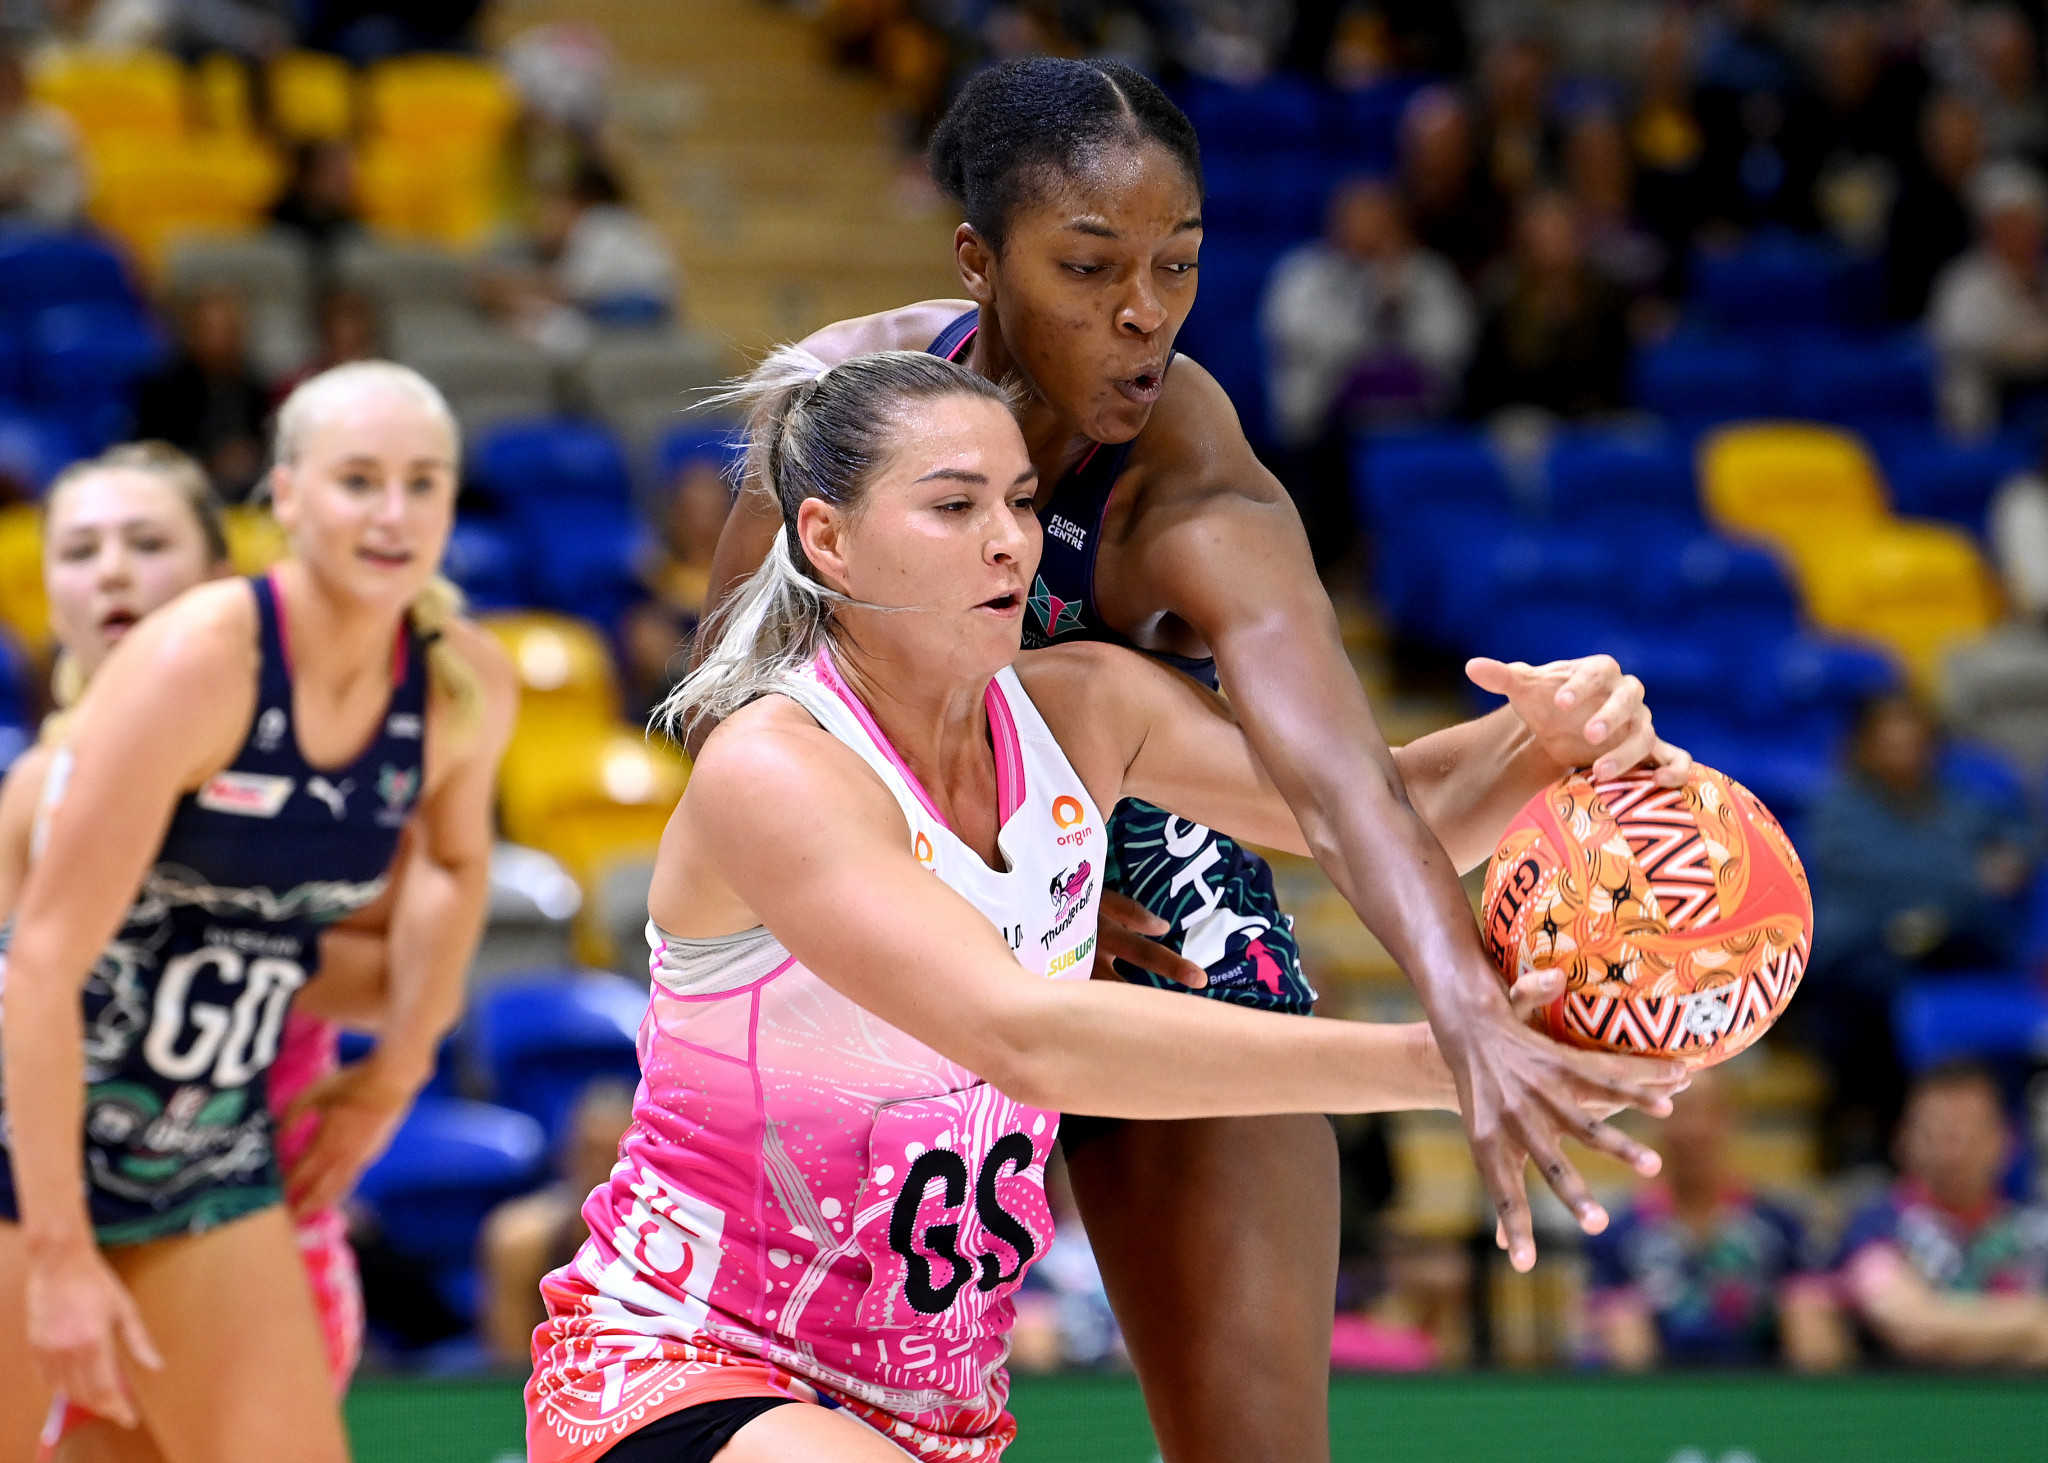 The Adelaide Thunderbirds will play the Melbourne Vixens in the first match while south-east Queensland is under lockdown ©Getty Images